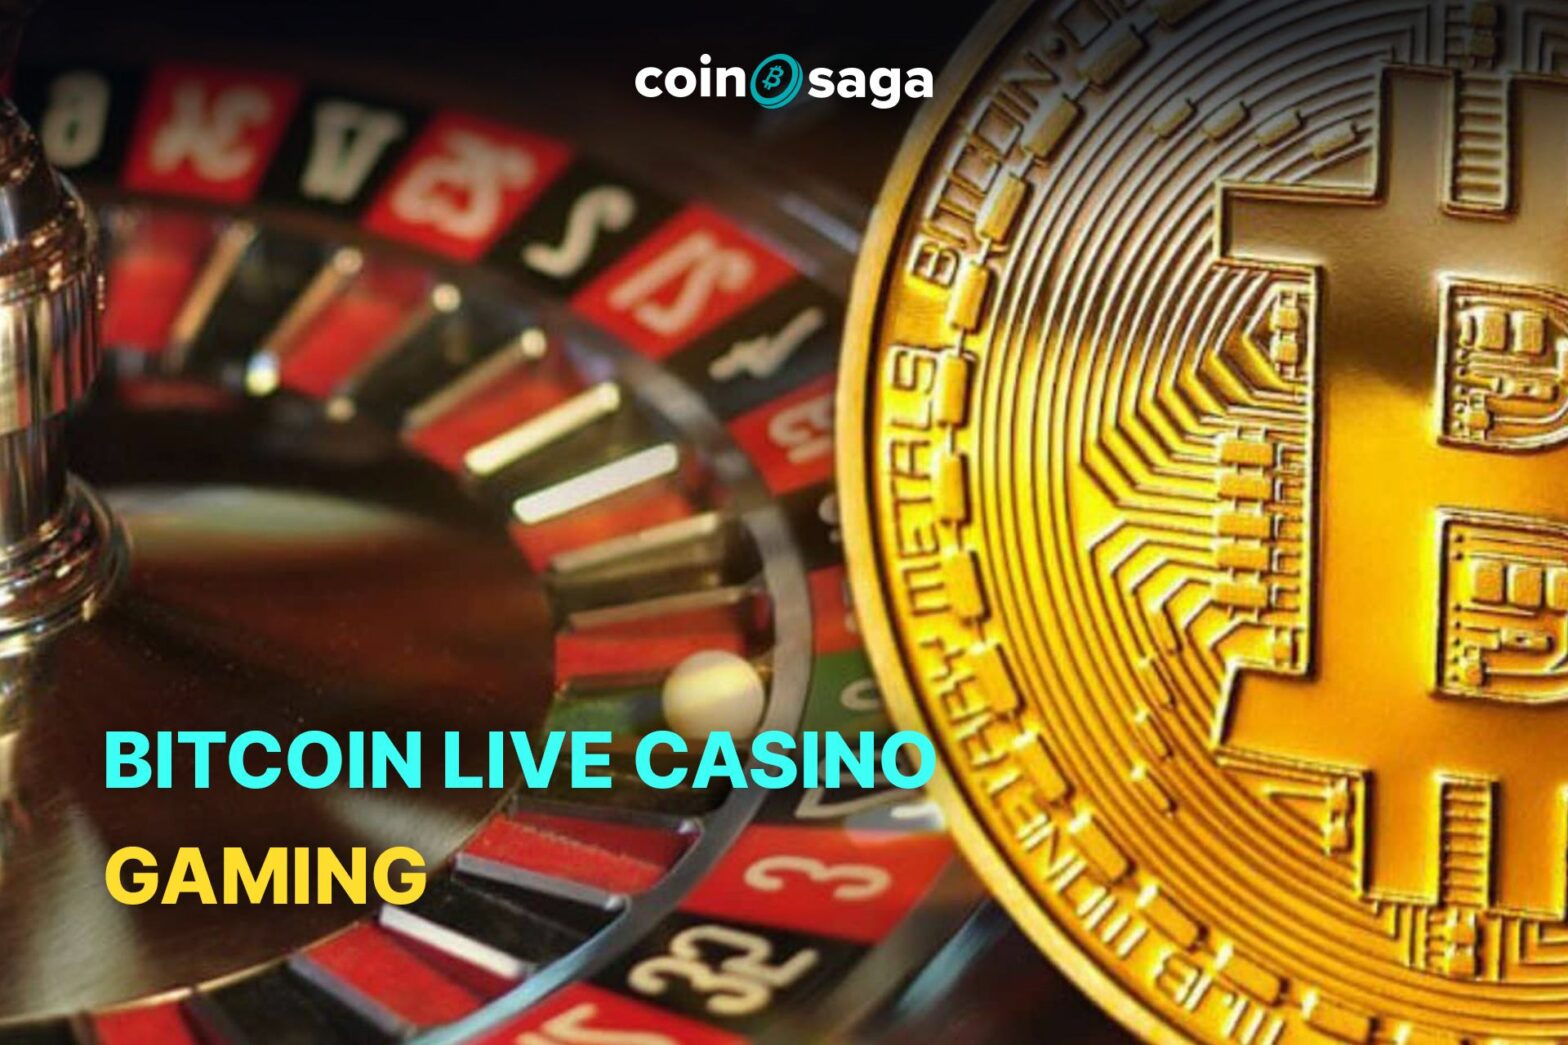 The Complete Process of trusted bitcoin casino